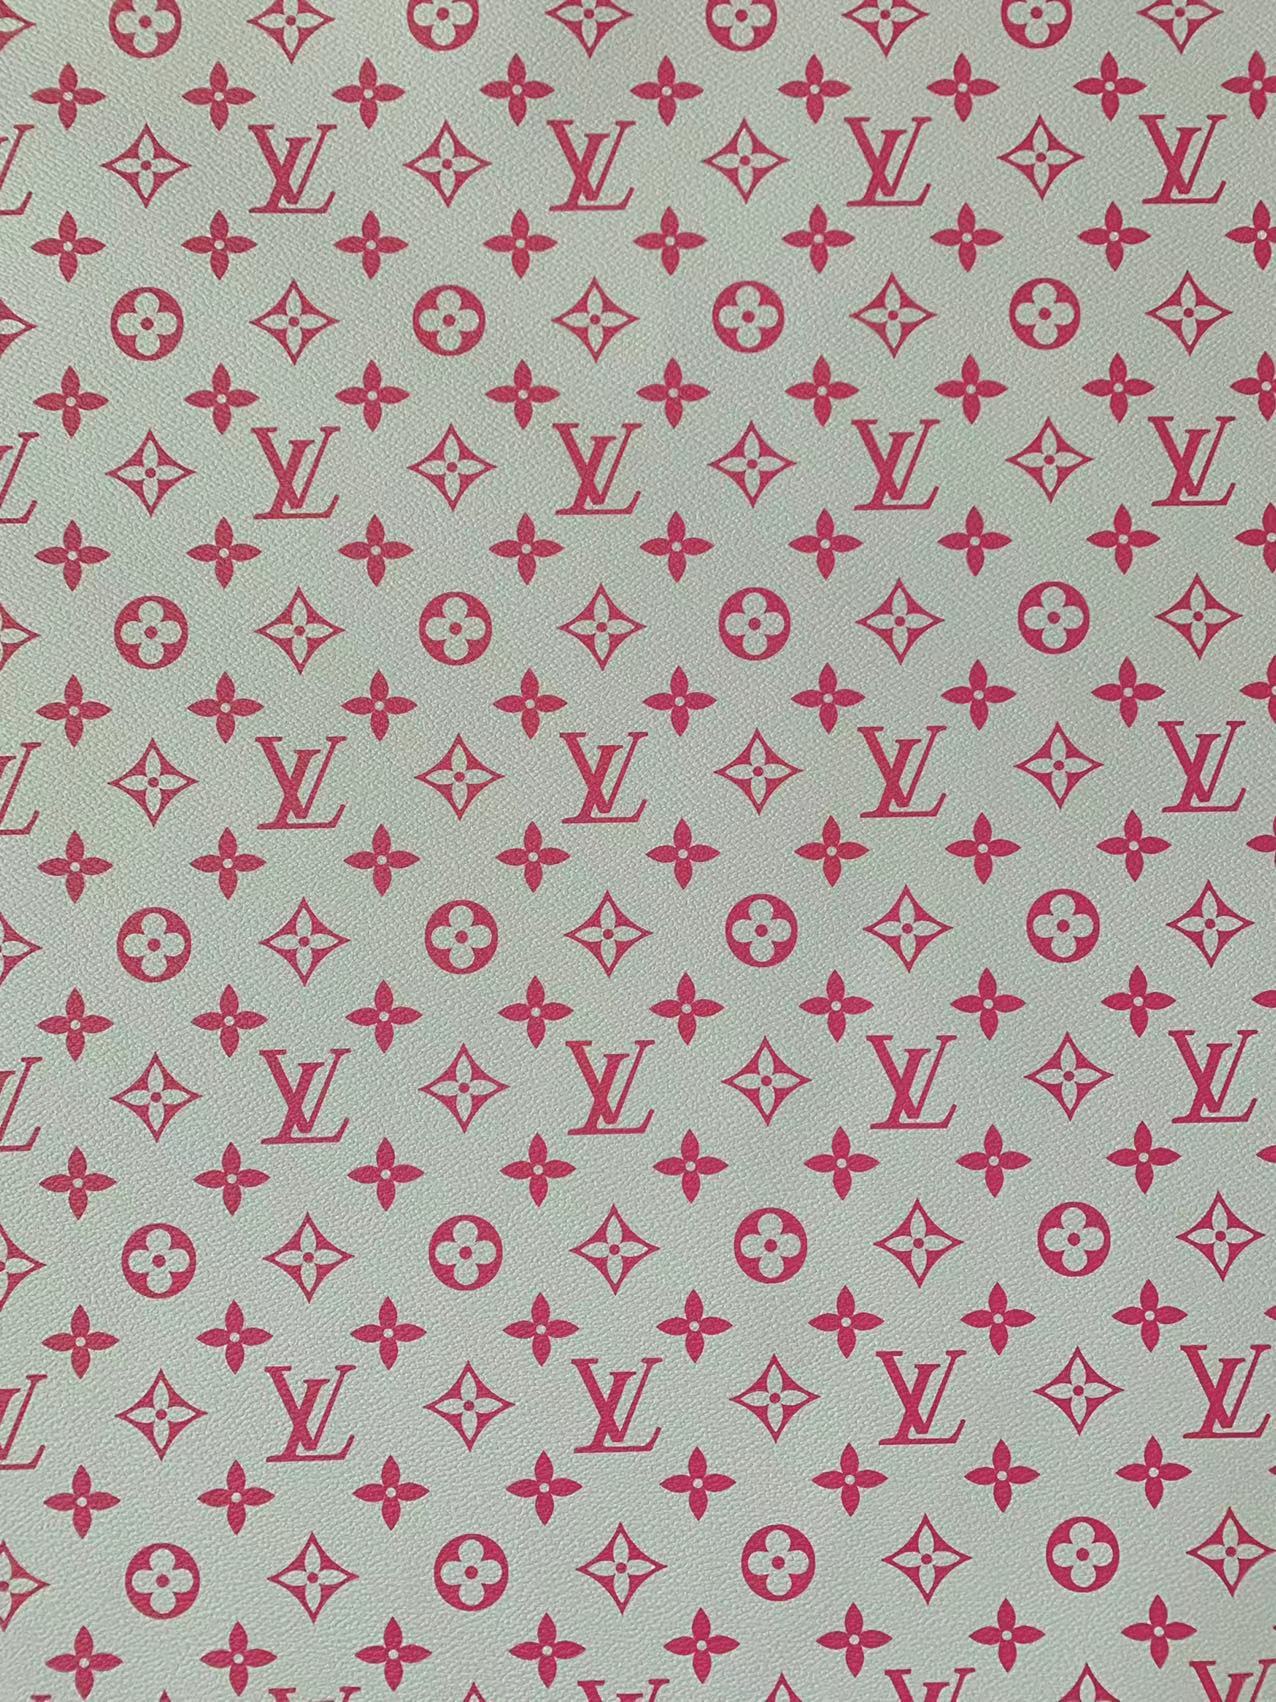 vuitton fabric by